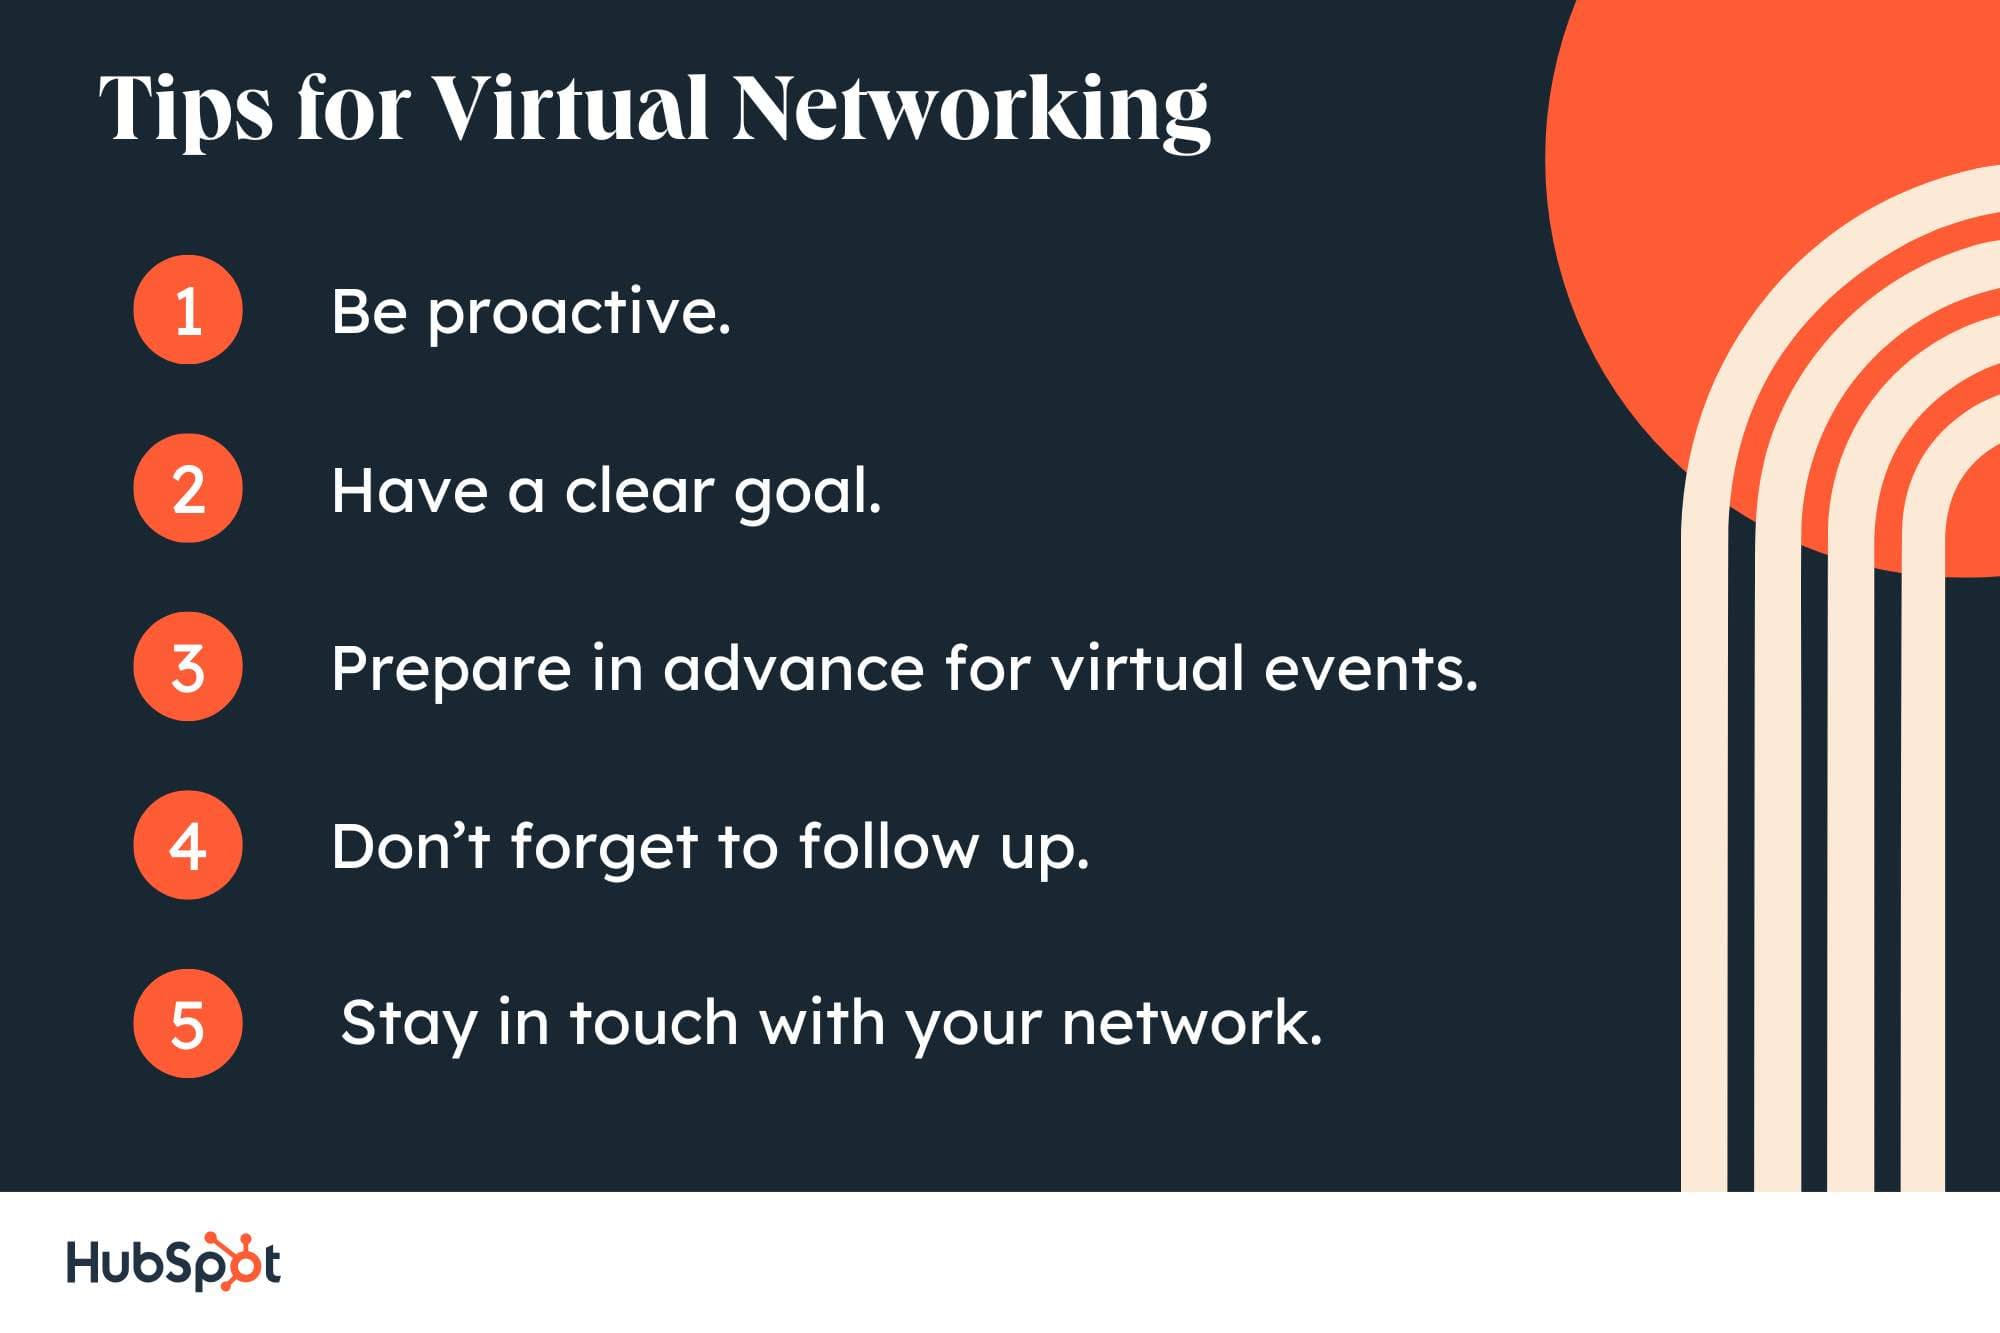 Tips for Virtual Networking. Be proactive. Have a clear goal. Prepare in advance for virtual events. Don’t forget to follow up. Stay in touch with your network.